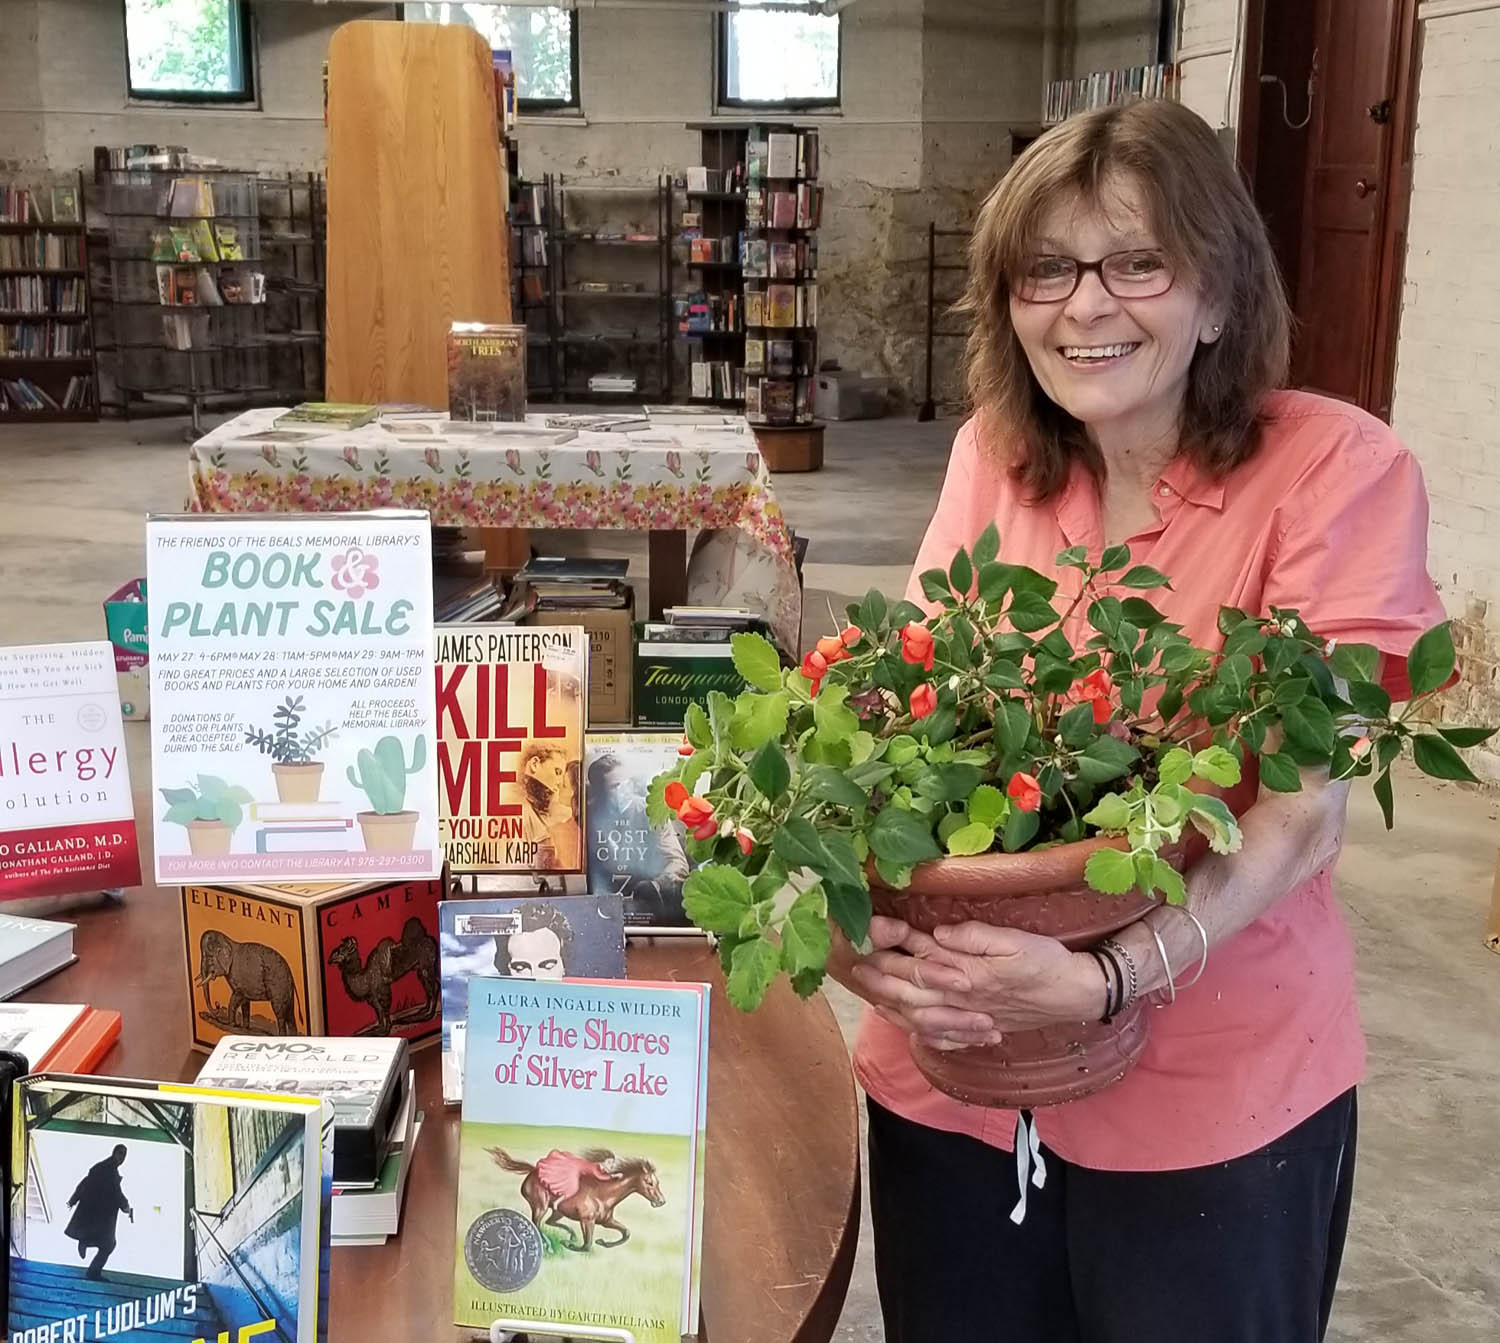 Book and plant sale at the Beals